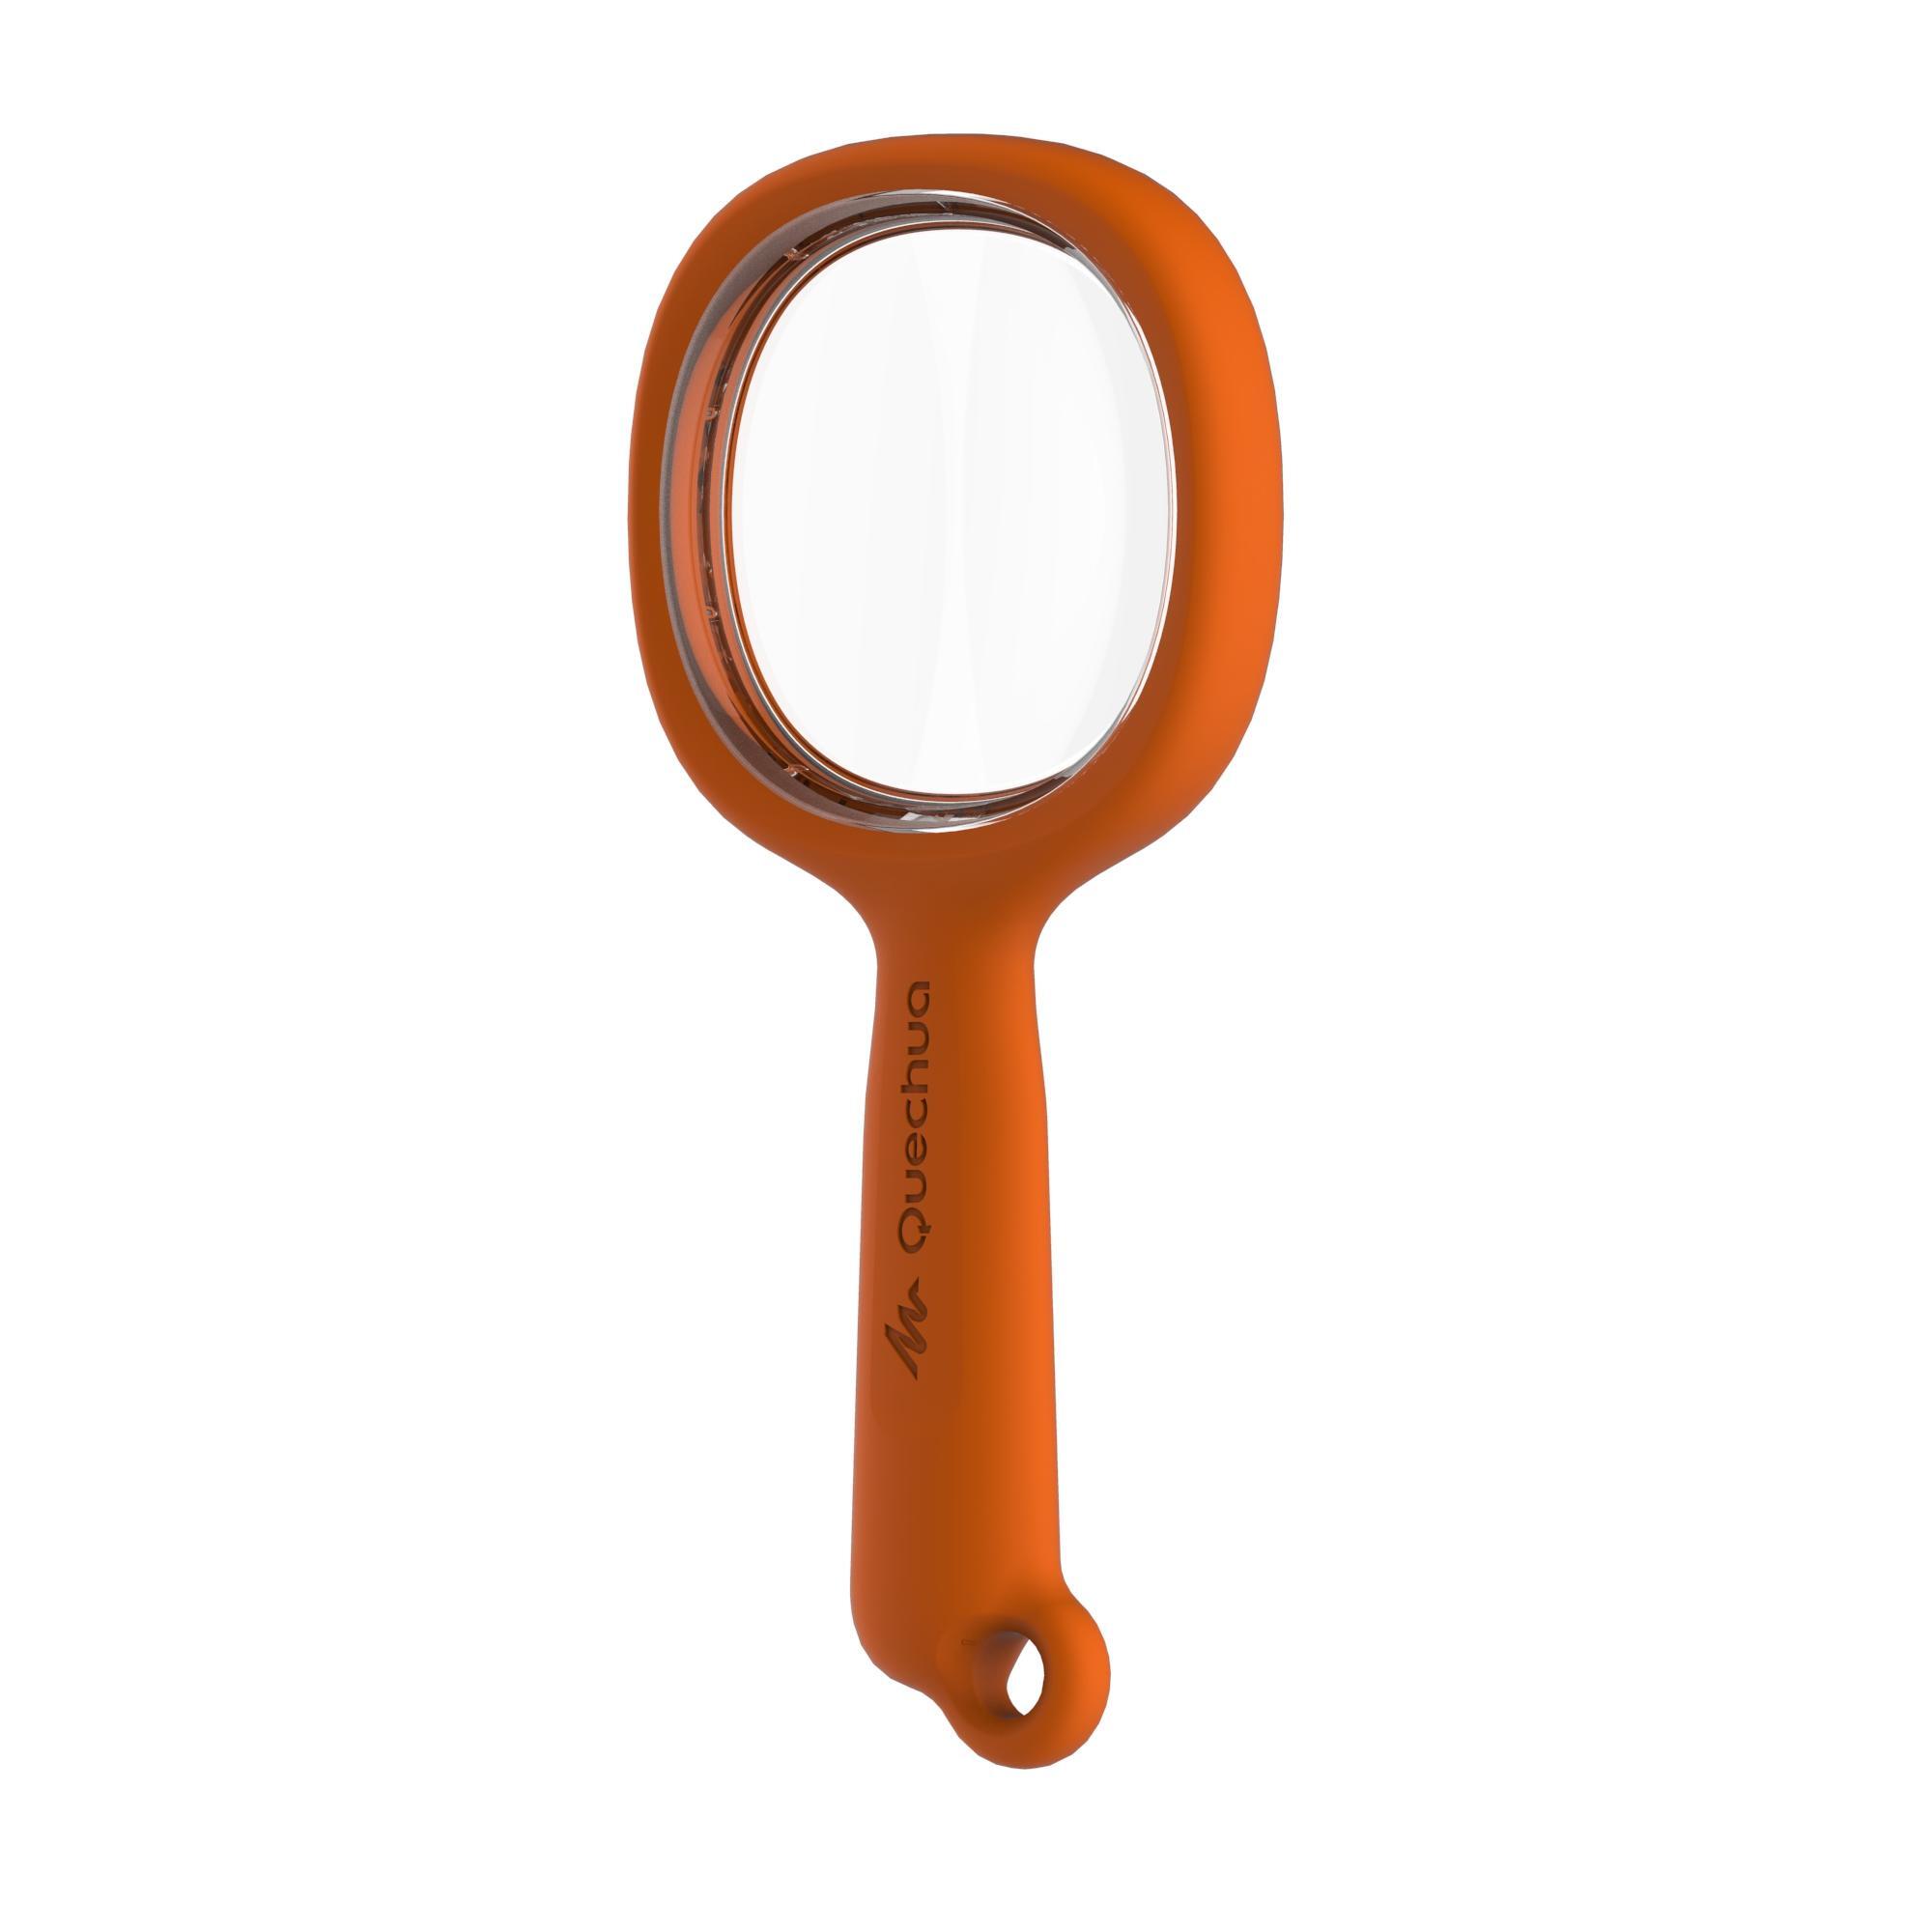 Kids' Hiking Magnifying Glass MH100 x3 magnification - Orange 3/3